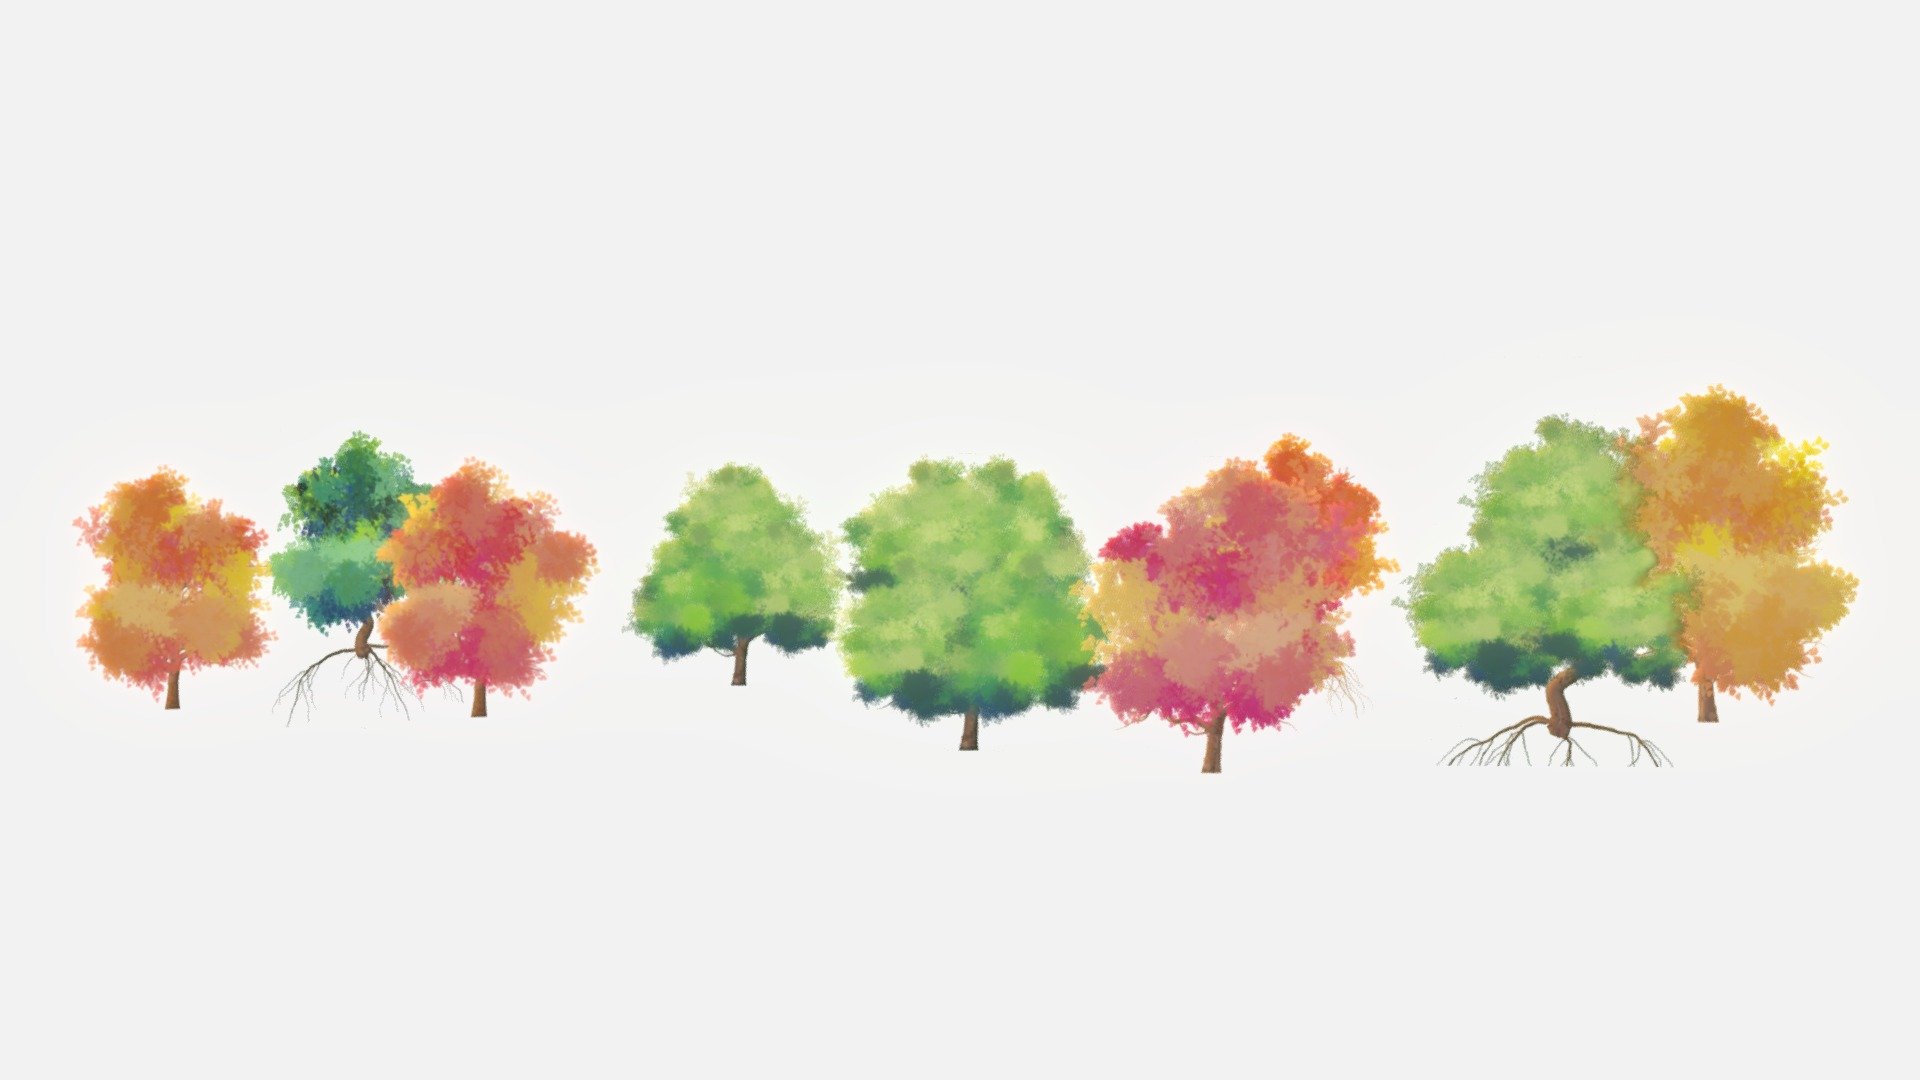 2D Handpainted Trees as plane billboards for your 2d/3d scene
Just add them on a plane and there you go 😇😁😁🌈🌈

i always wanted to buy some really good handpainted trees to buy. i couldnt find any somewhere, so i made my own 😋

Make them look at the camera, so they look at your direction any time and they are ready to level up your scene 100%
Enjoy!❤🌈☀😇✌ - 2d Handpainted Trees Billboards - Buy Royalty Free 3D model by ahingel 3d model